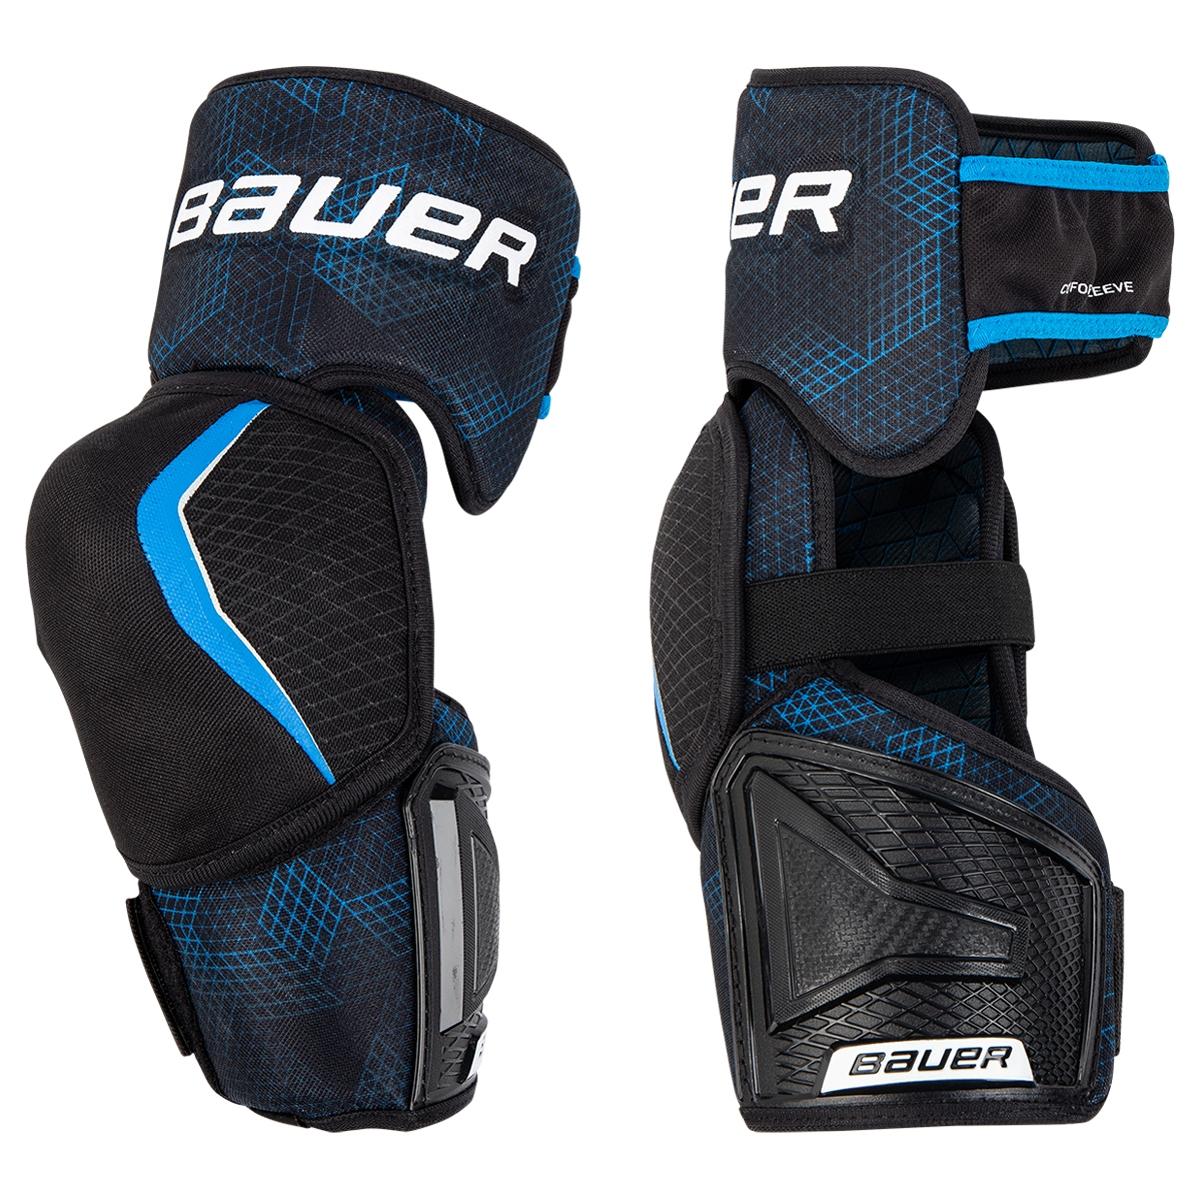 Bauer X Sr. Hockey Elbow Padsproduct zoom image #1